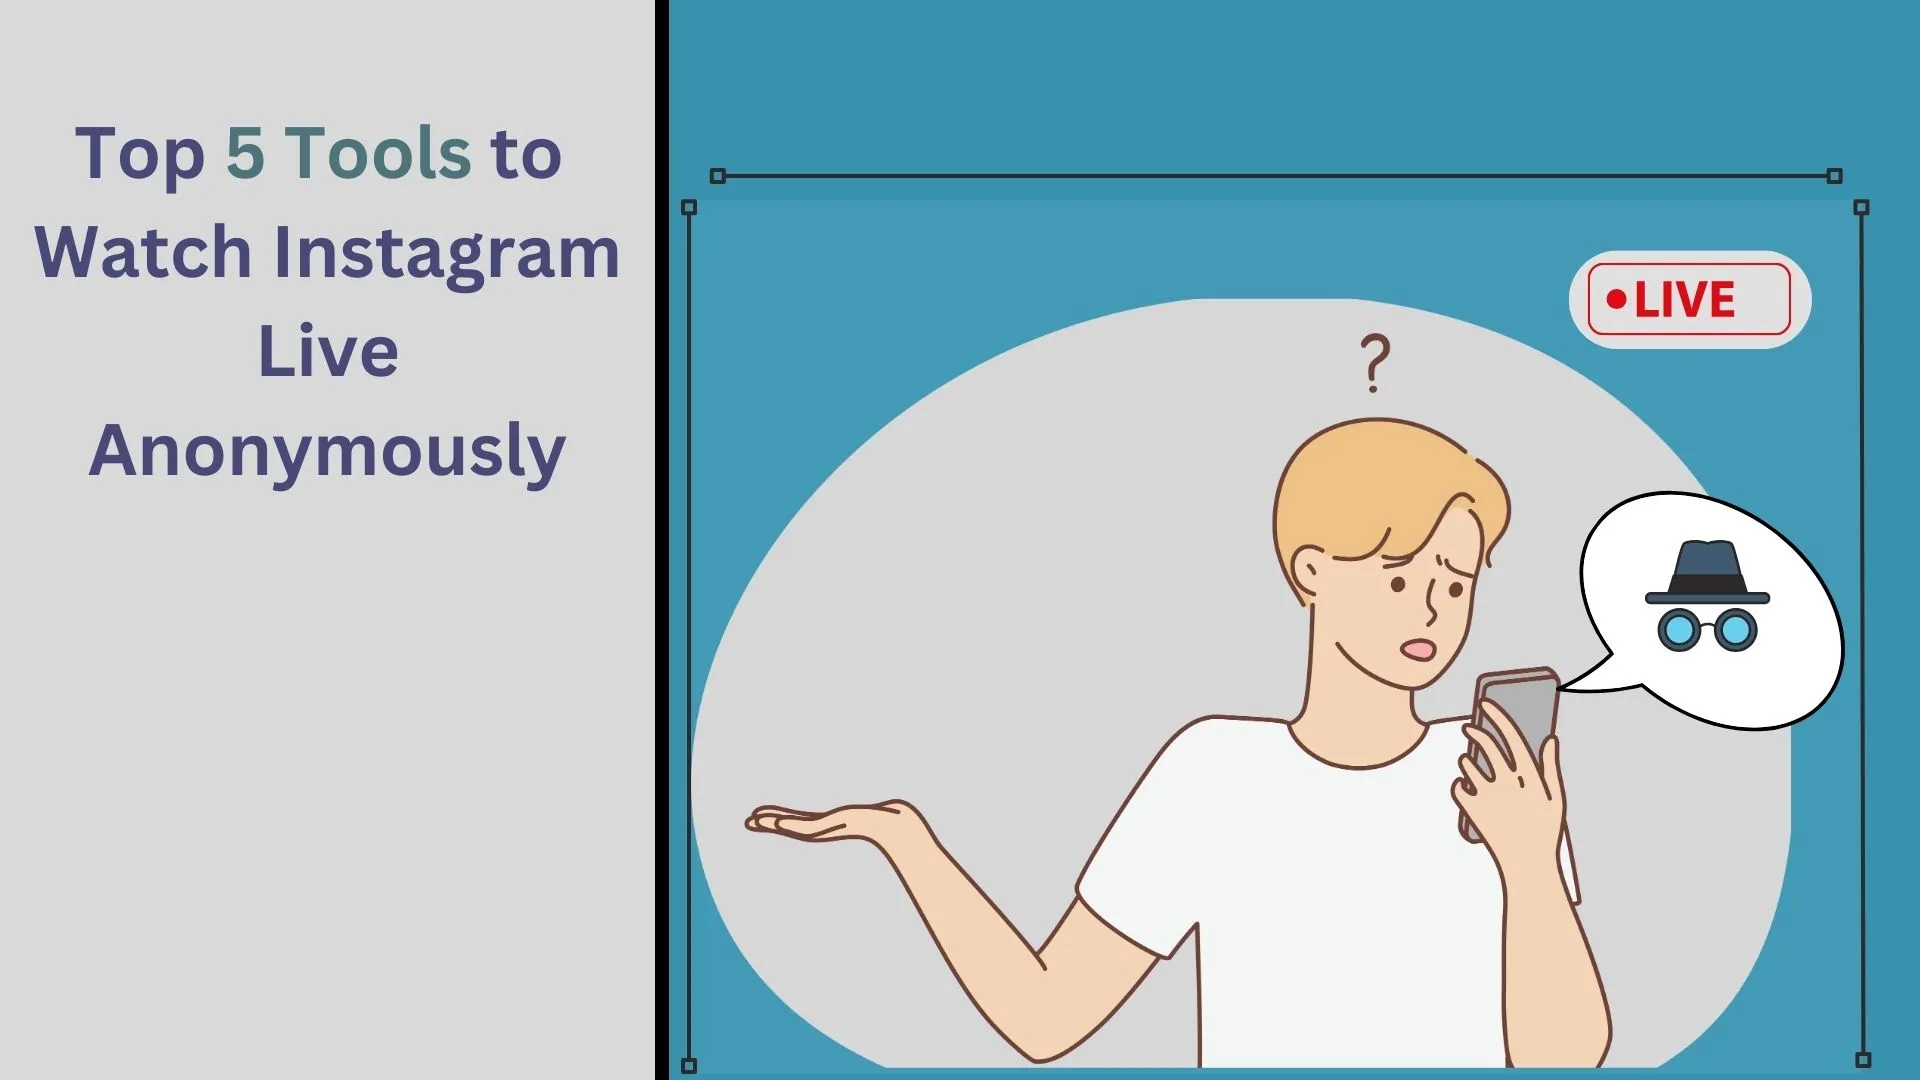 Top 5 Tools to Watch Instagram Live Anonymously